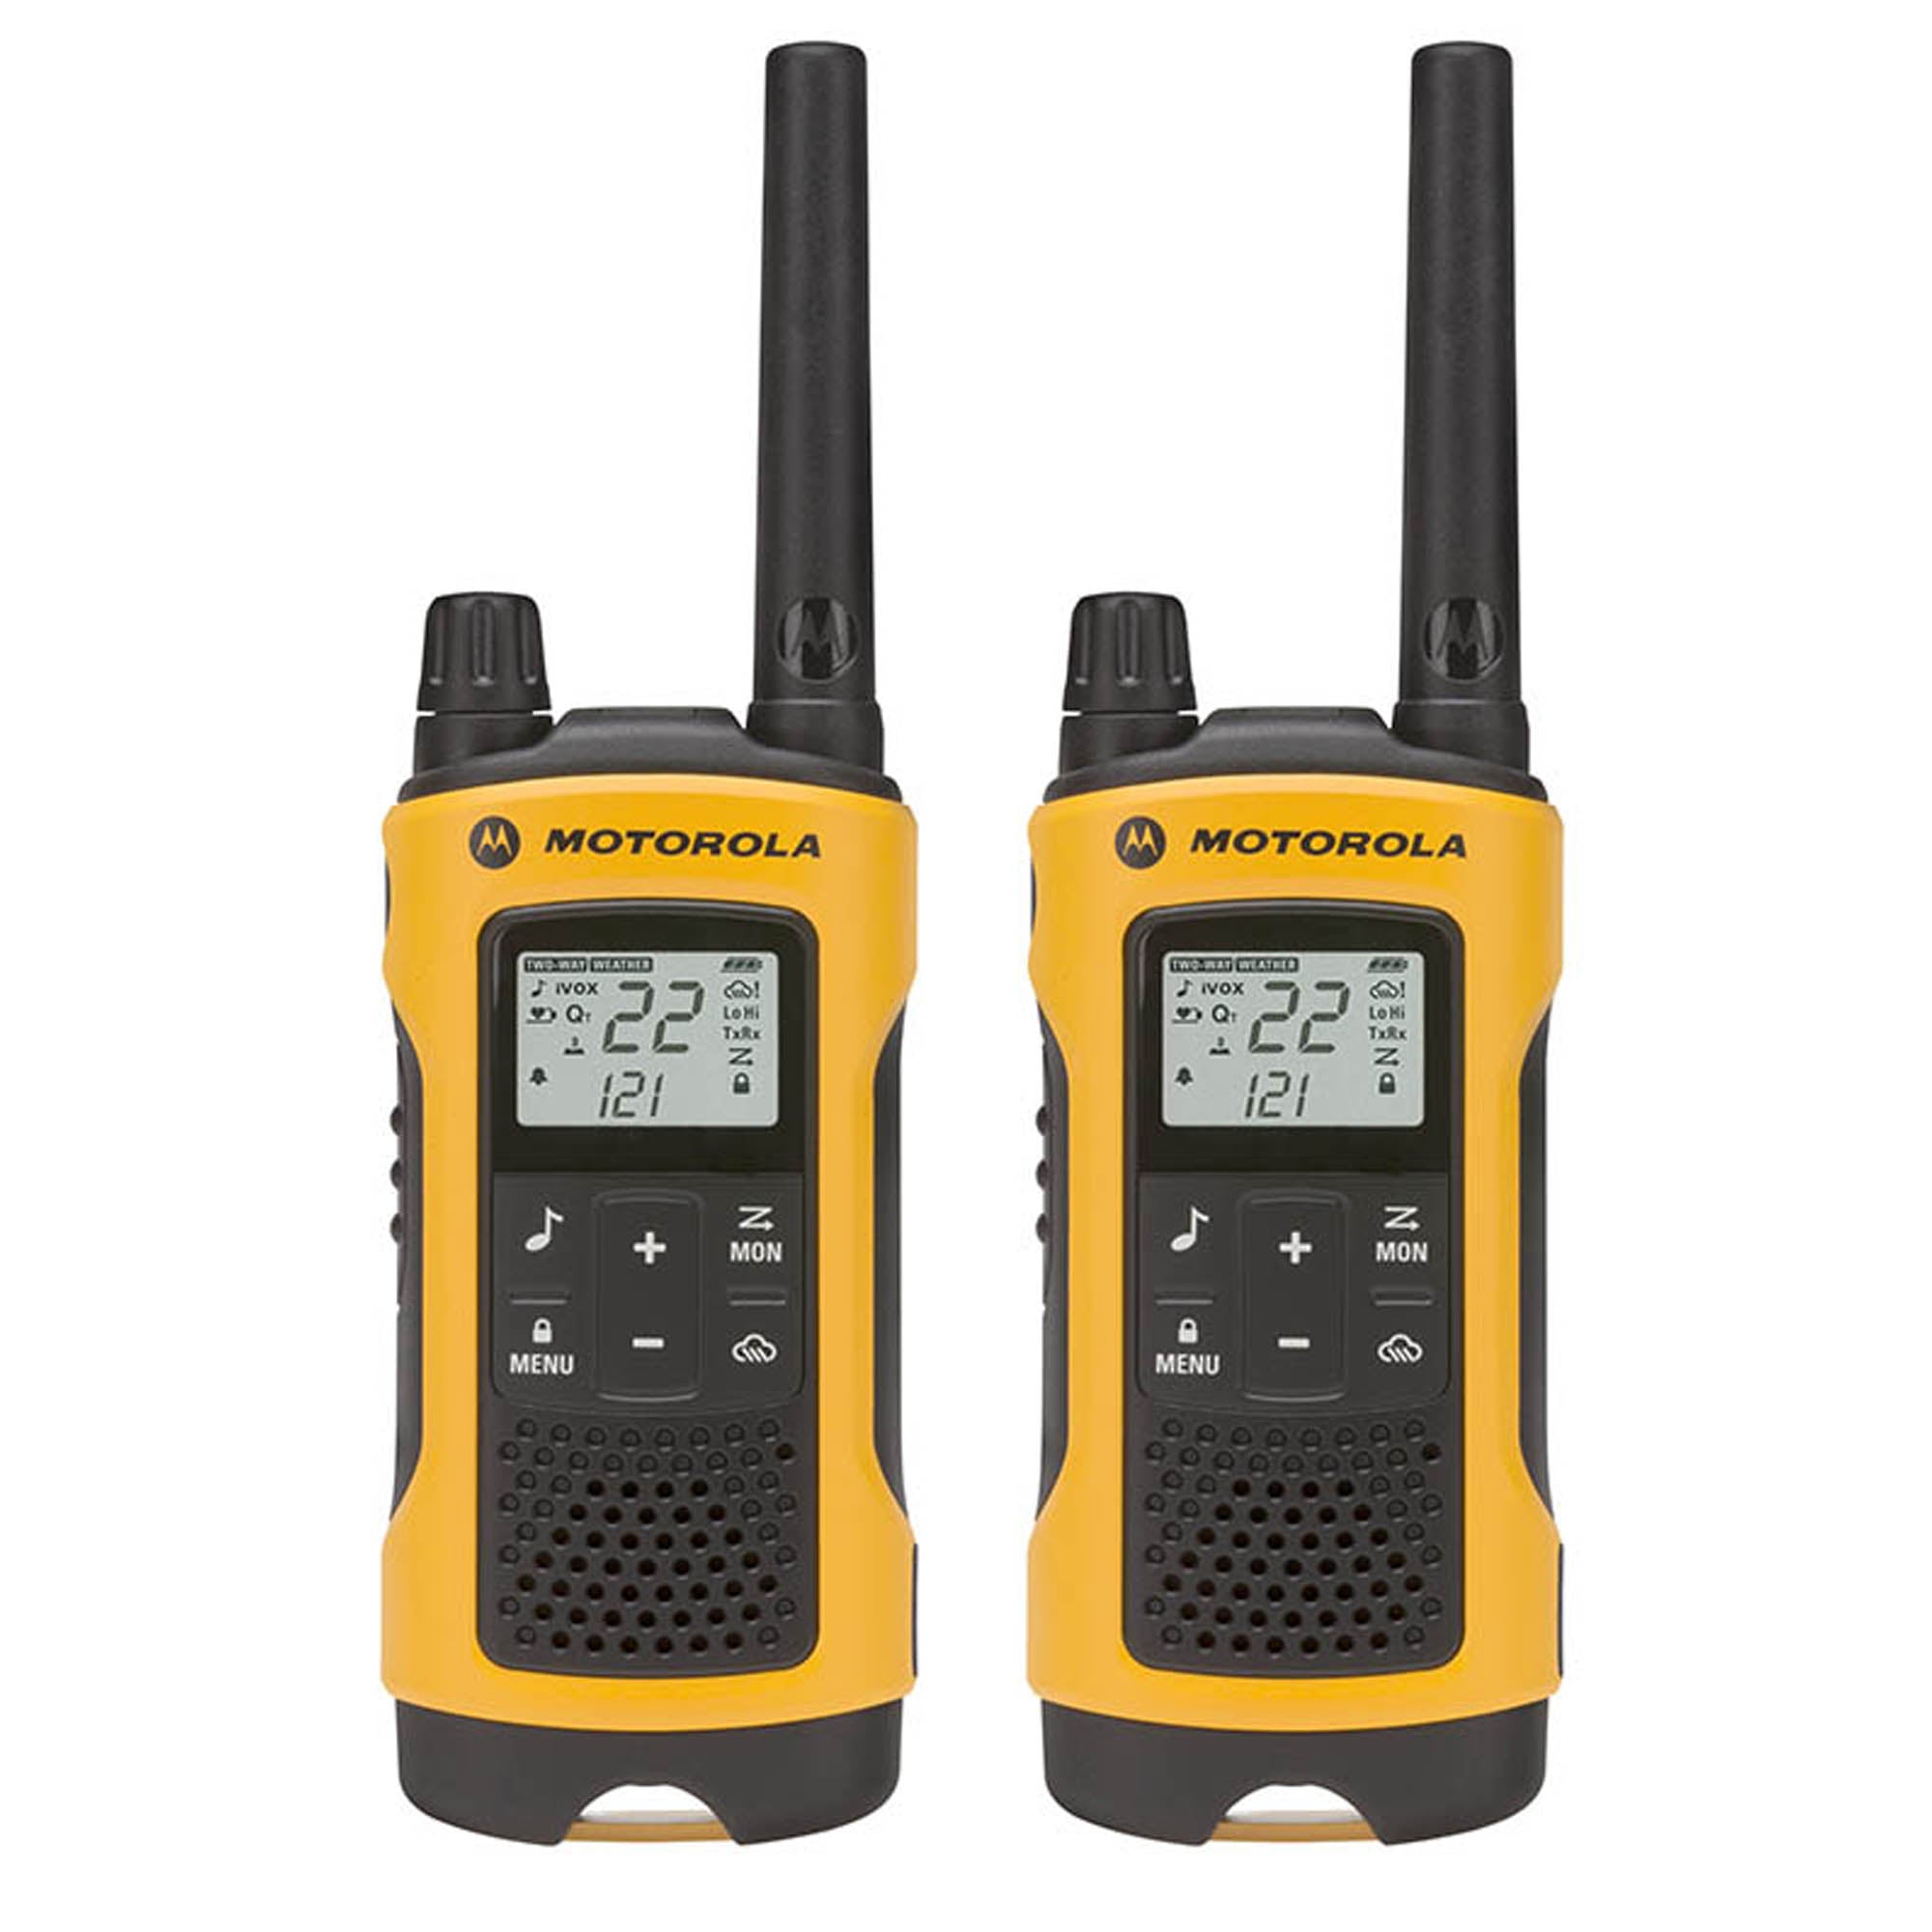 What's the best walkie-talkie for keeping in touch on the ski slopes?